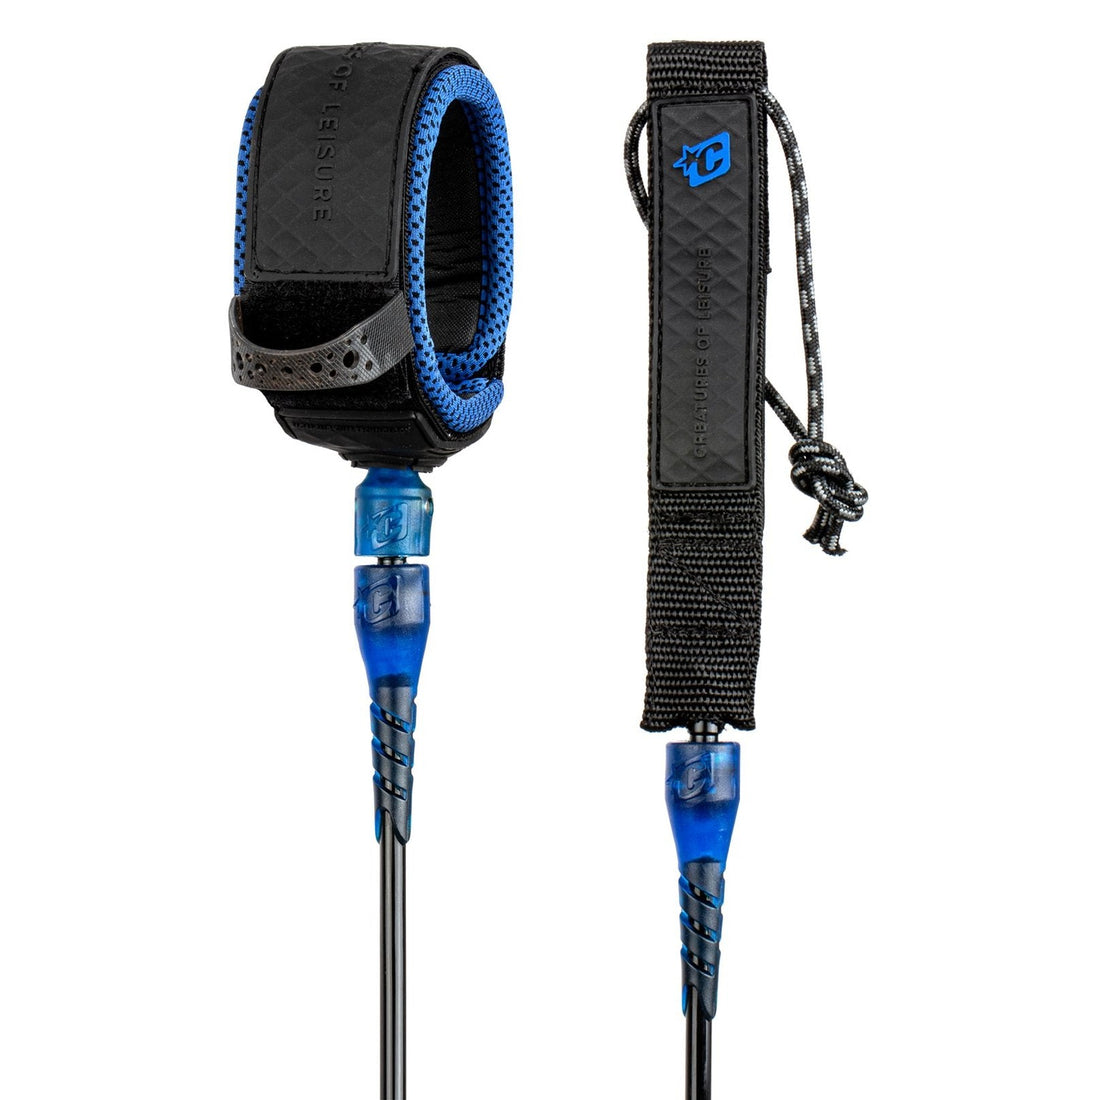 CREATURES OF LEISURE RELIANCE PRO 6FT LEASH BLACK CYAN